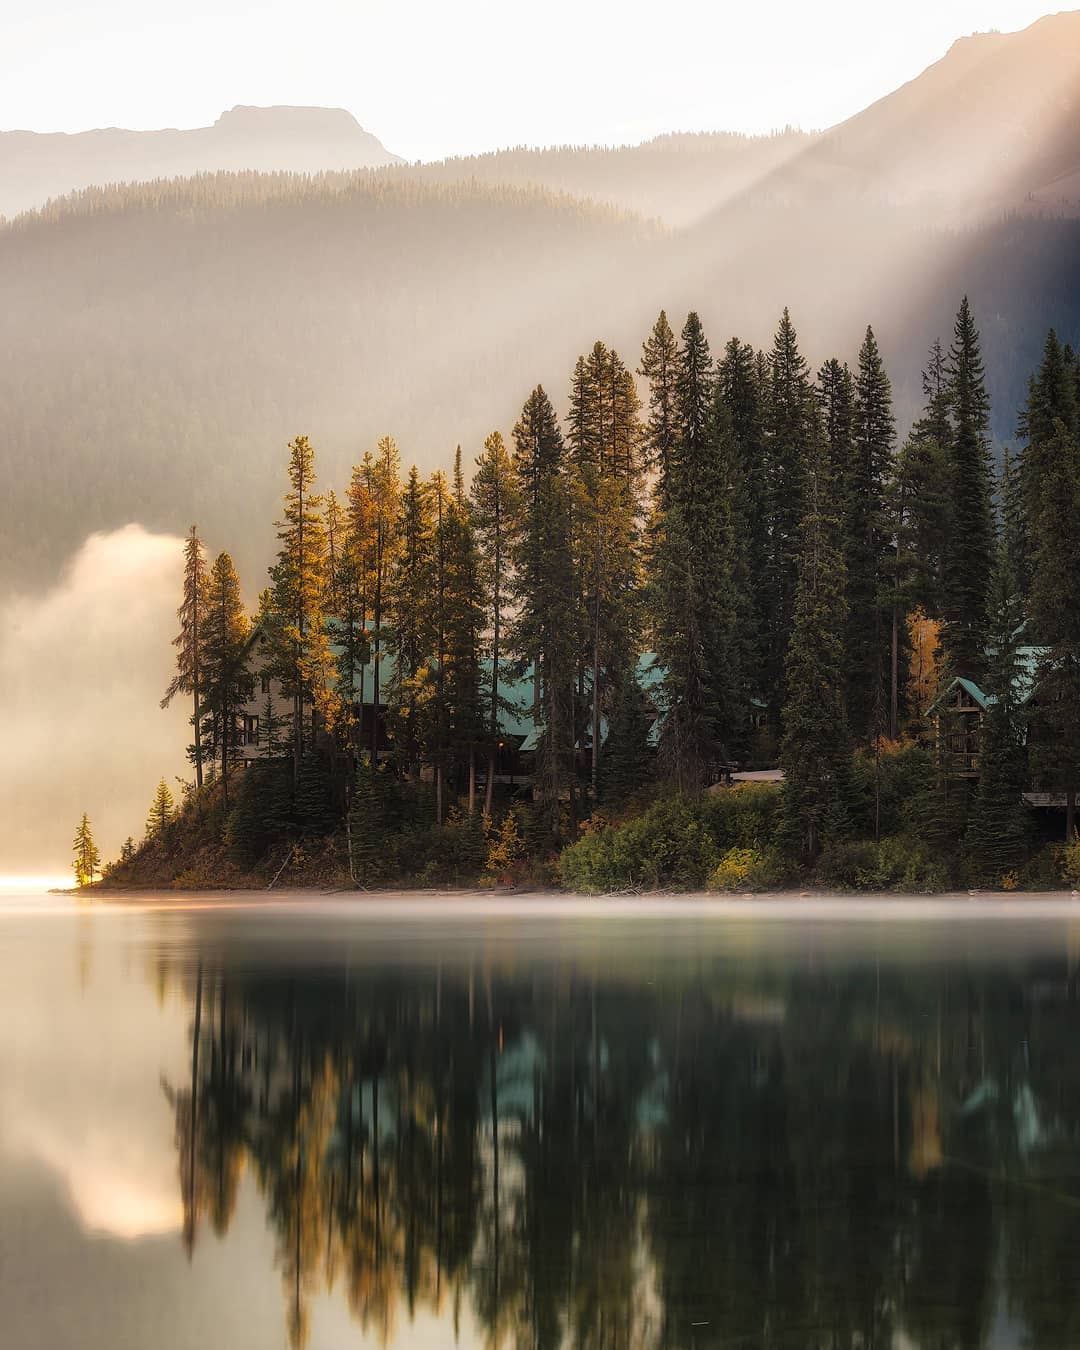 Fall morning on Emerald Lake. The light shines down on the lake over a small island with trees.